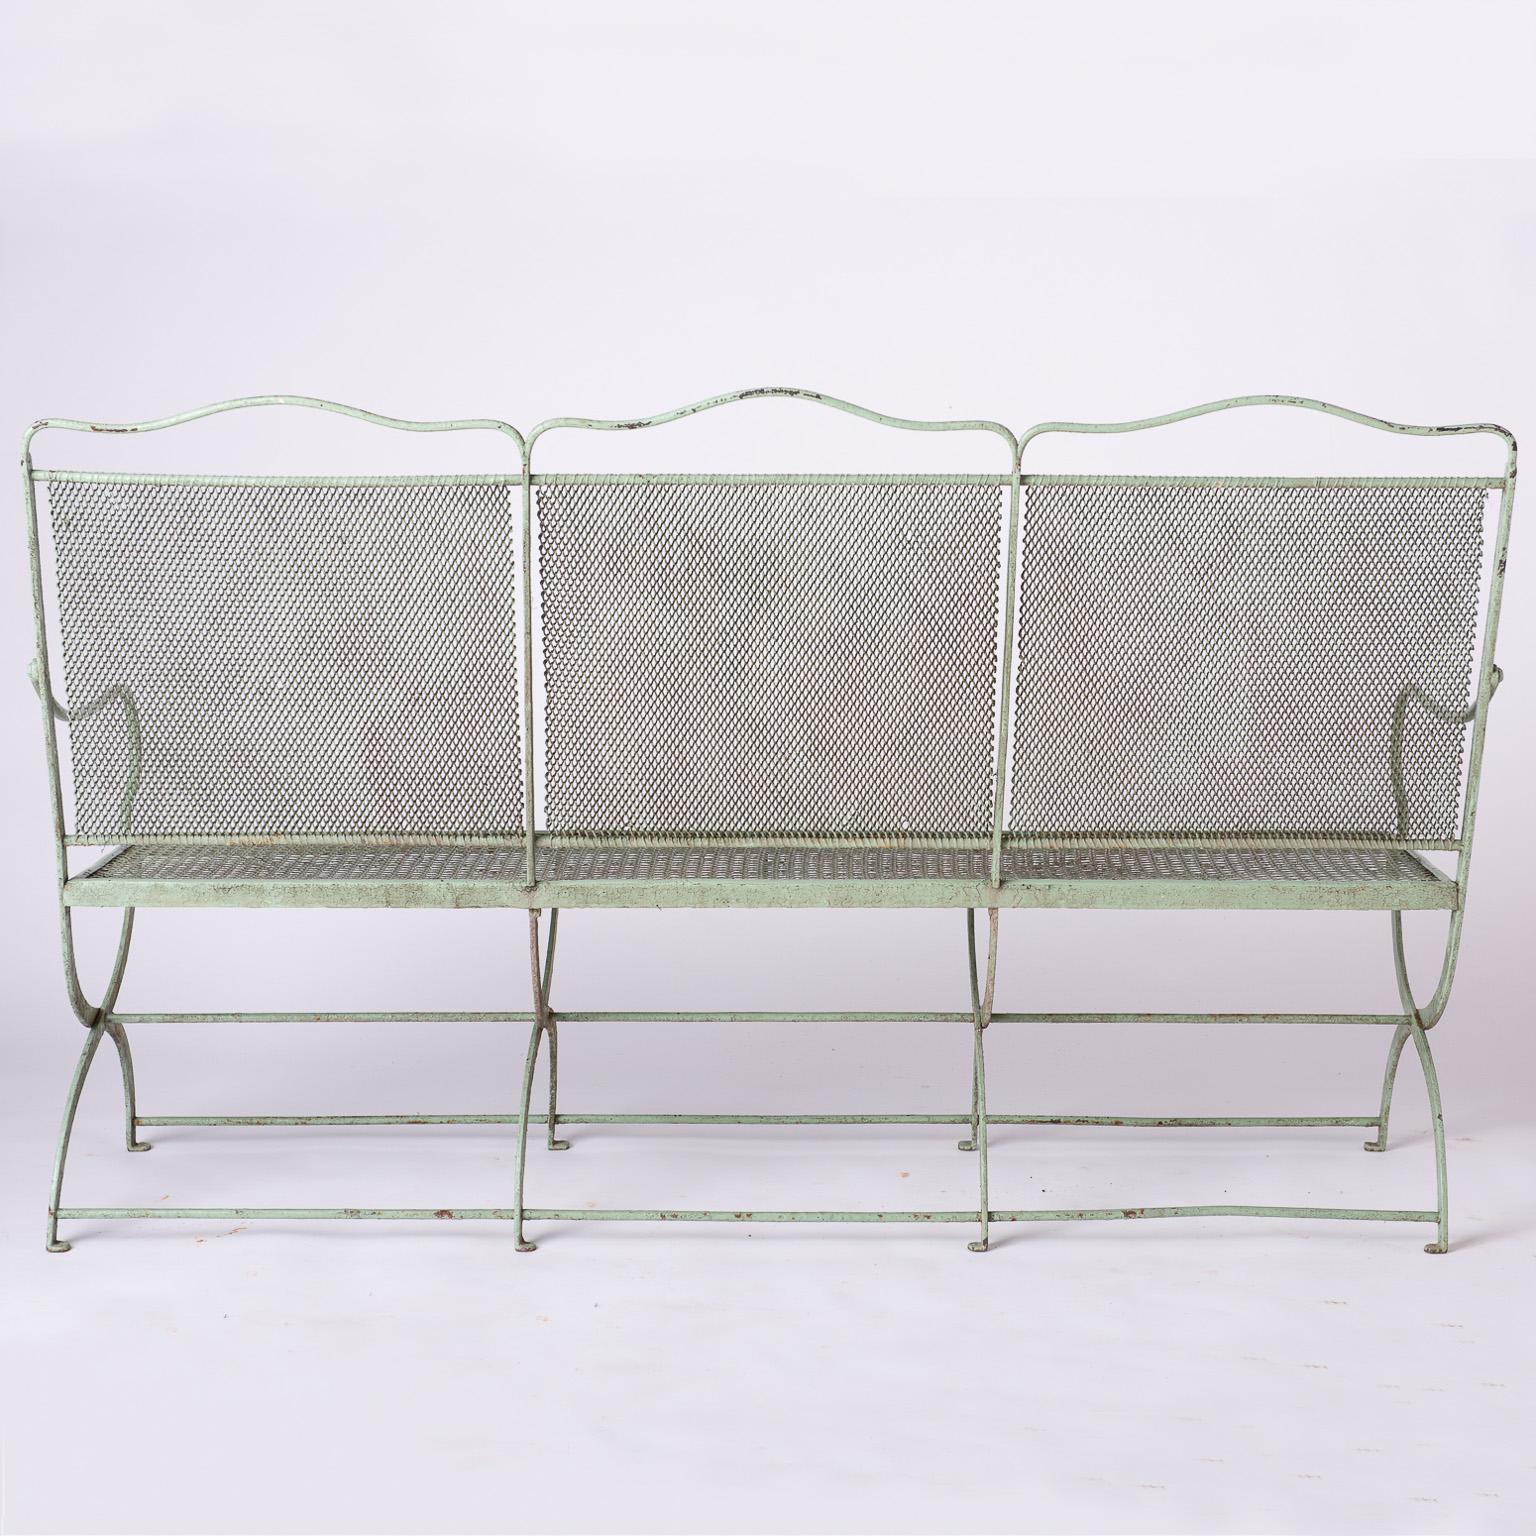 French Wrought Iron Garden Bench with Old Green Paint, circa 1920 For Sale 4